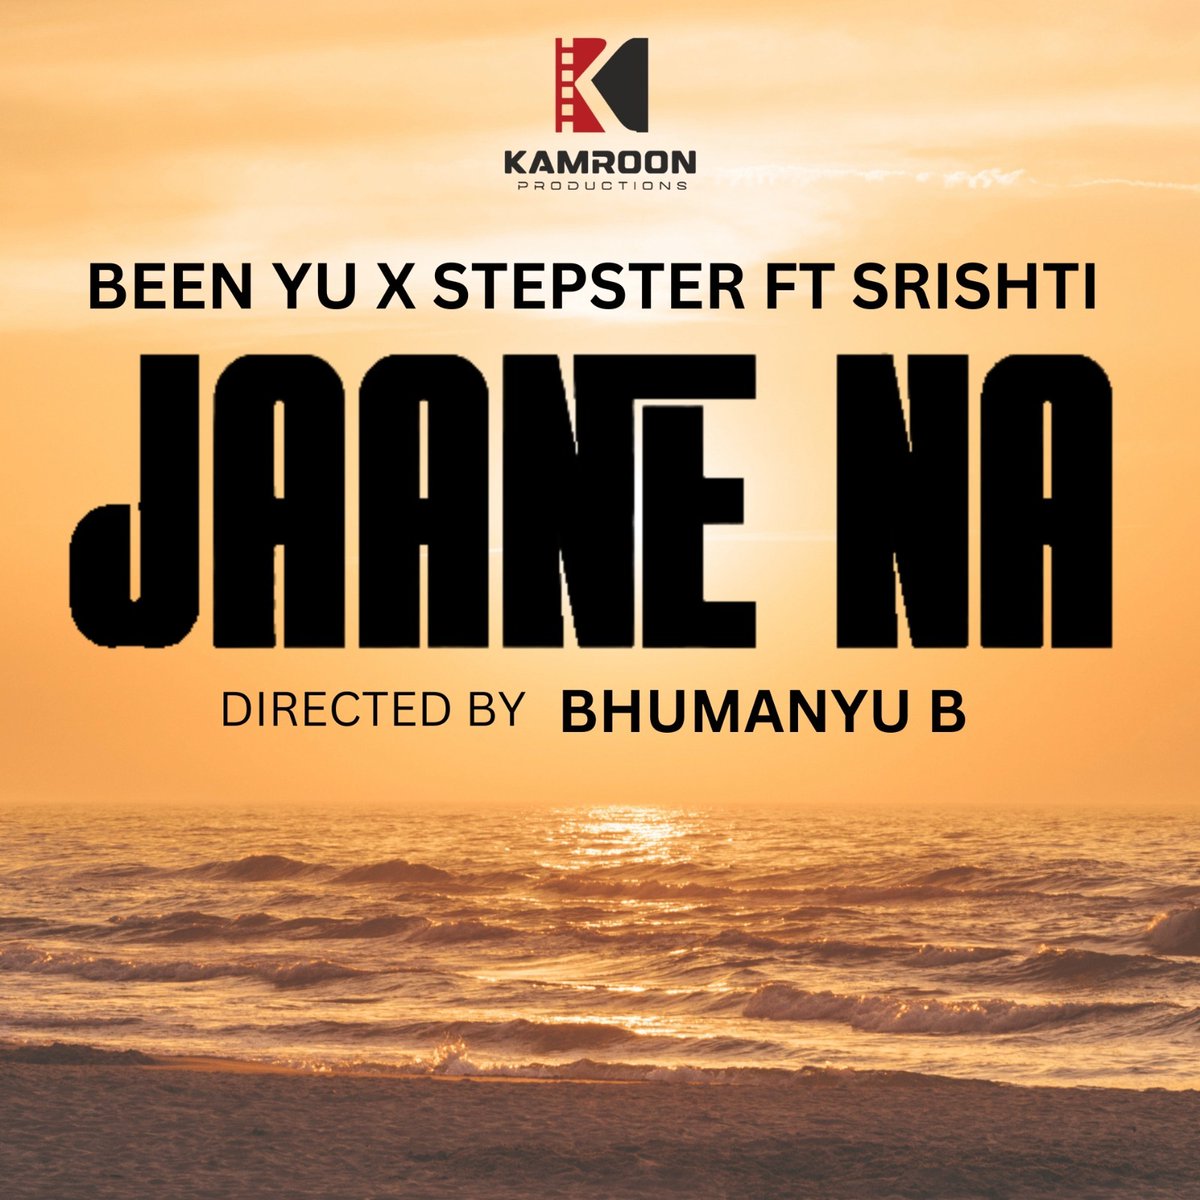 Kamroon Production's  Music, 'Jaane Na,'. 🎤 Let the music convey the emotions your heart struggles to articulate.

Jaane Na - Been Yu, Stepster - ft. Srishti Vyakaranam

#bollywood #bollywooddance #musicvideo #bollywoodactresses #movie #music